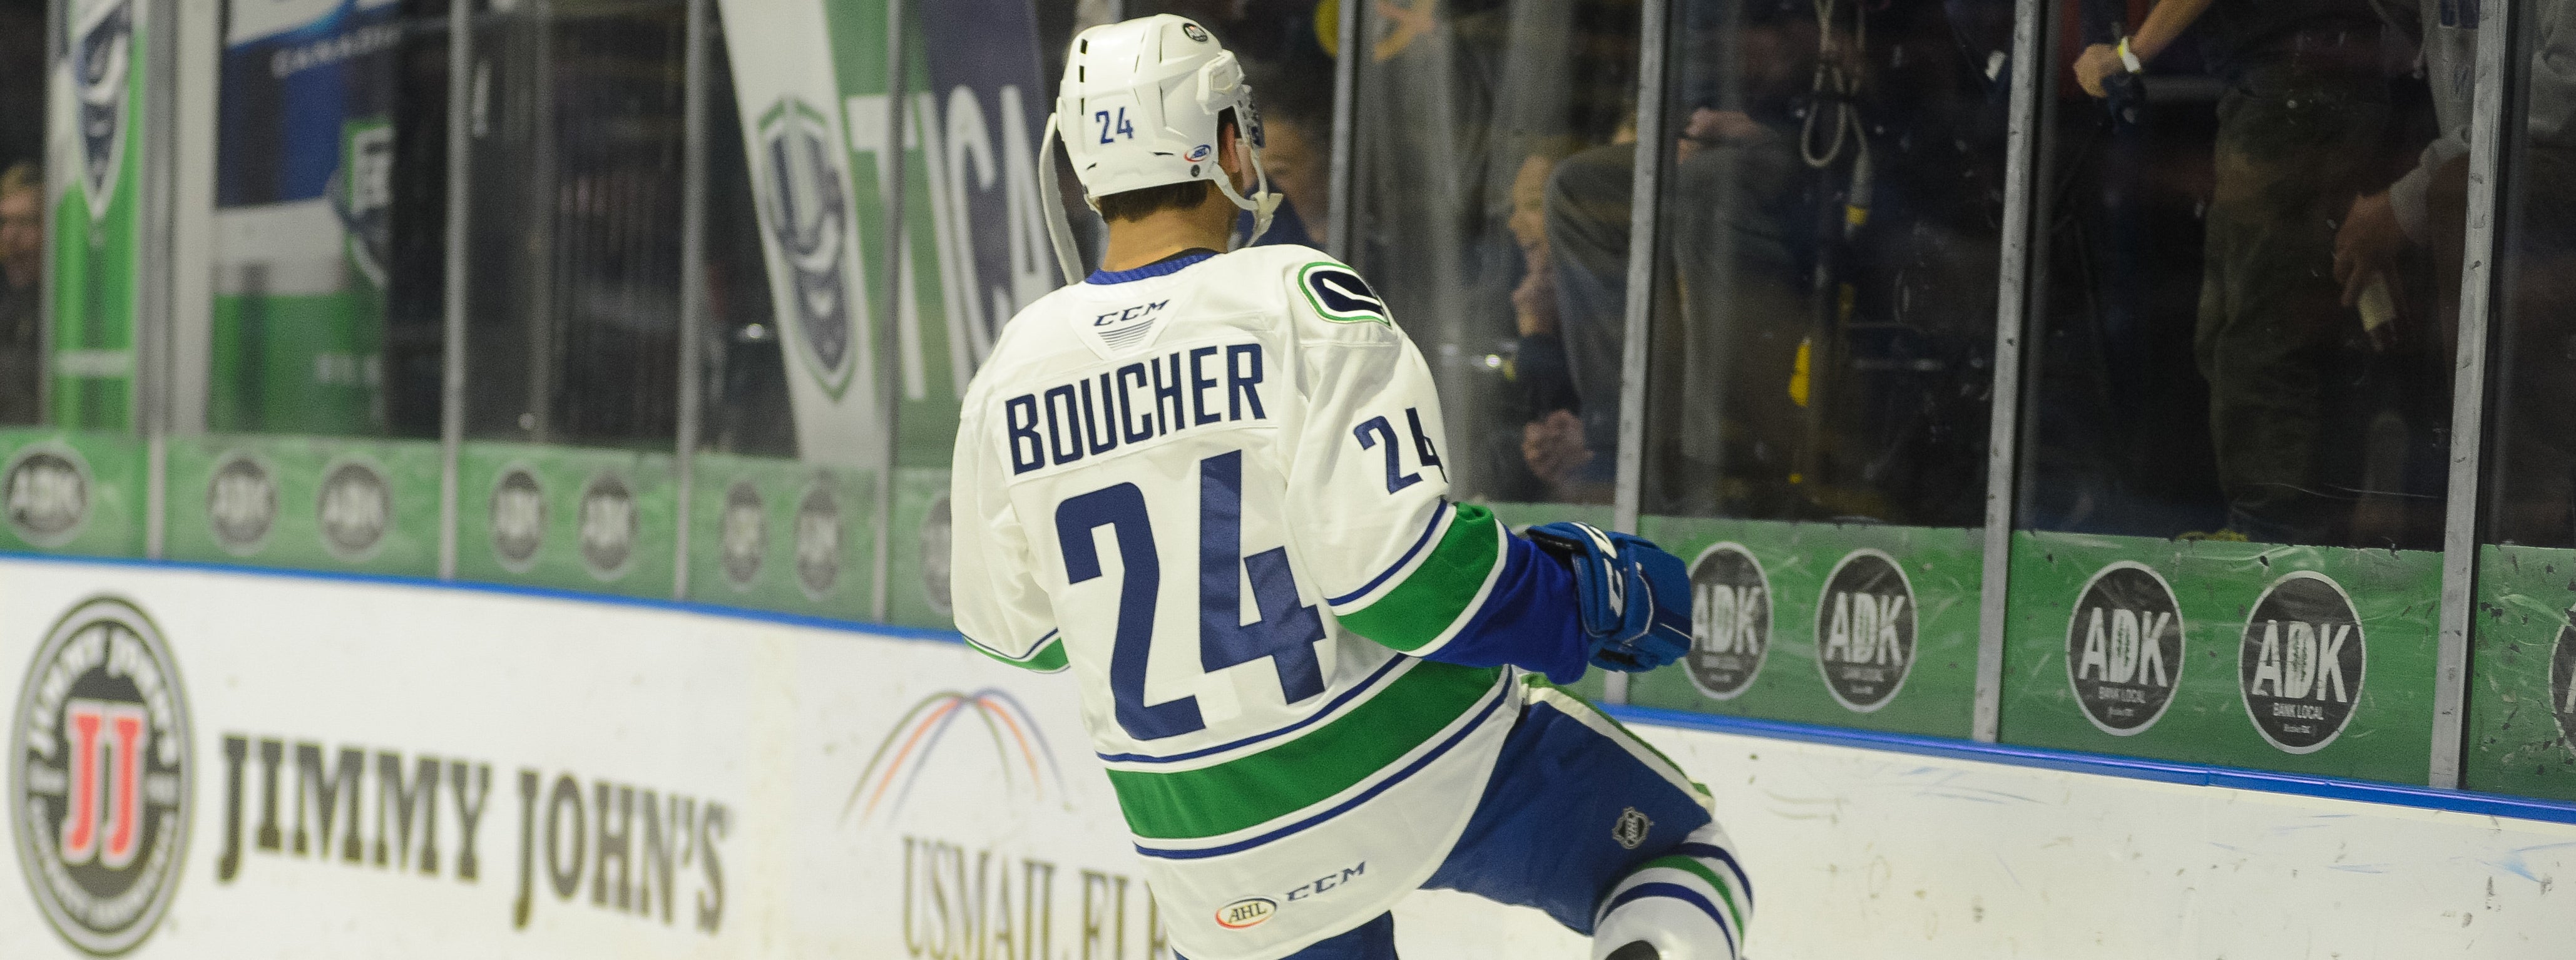 YEAR IN REVIEW: BOUCHER'S RECORD BREAKING SEASON